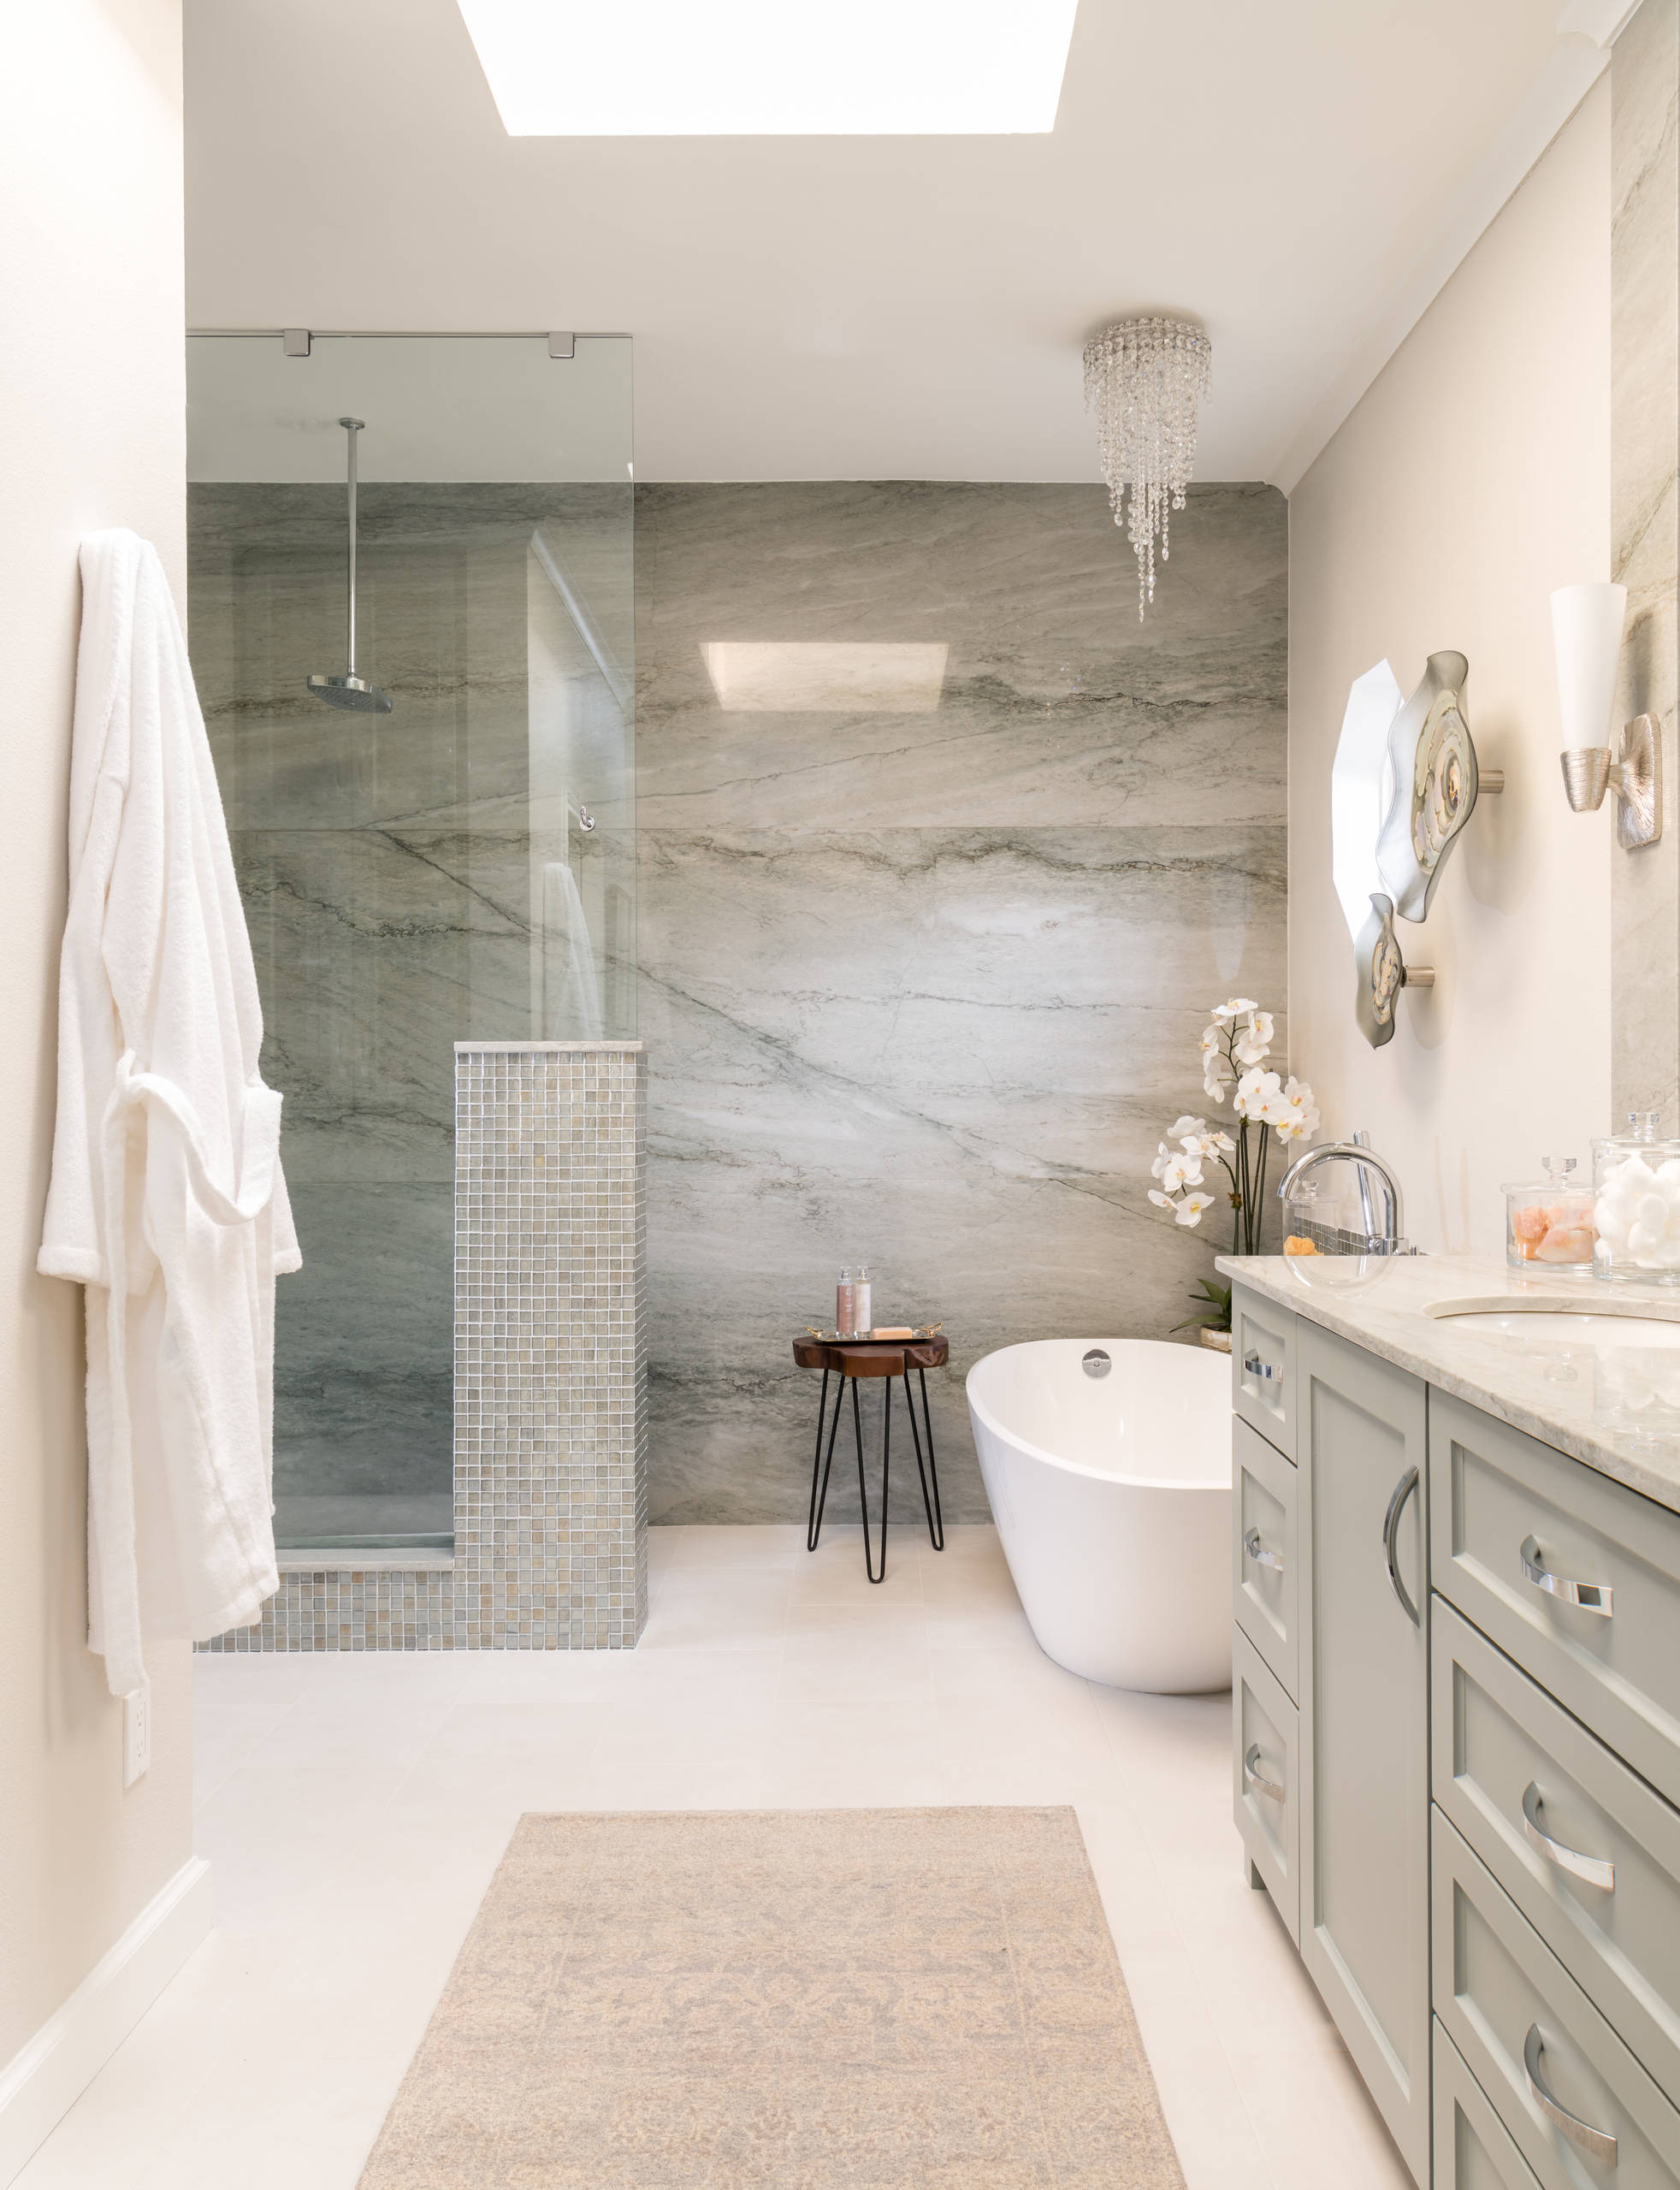 Modern bathroom rugs are a better choice  (from Houzz)